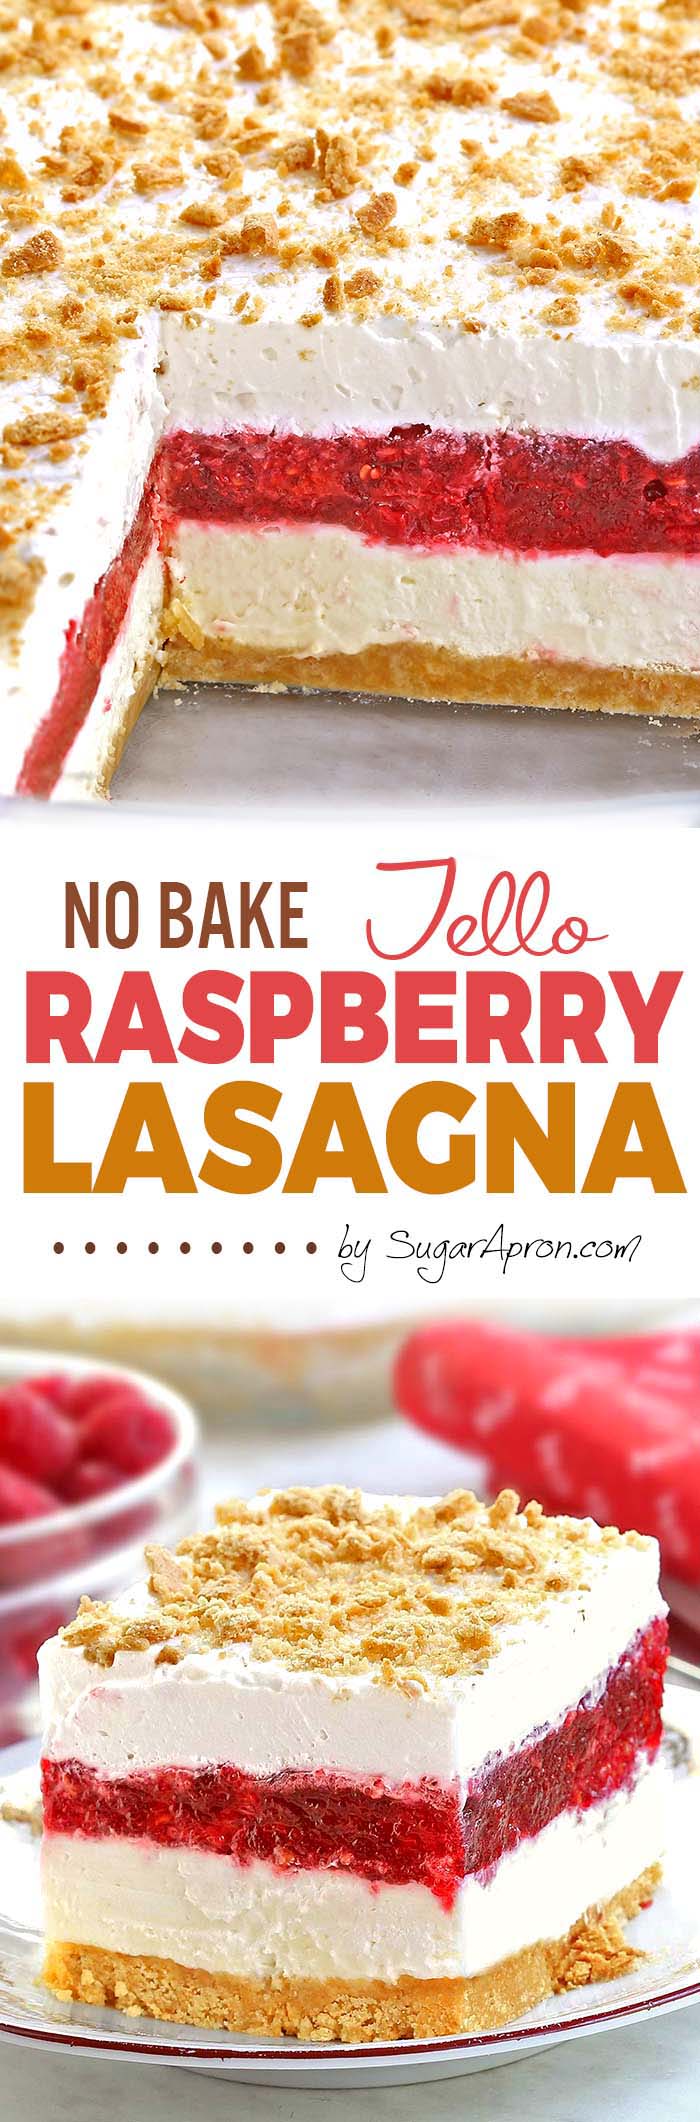 No Bake Raspberry Jello Lasagna - A light and easy dessert that is perfect for spring/summer gatherings.